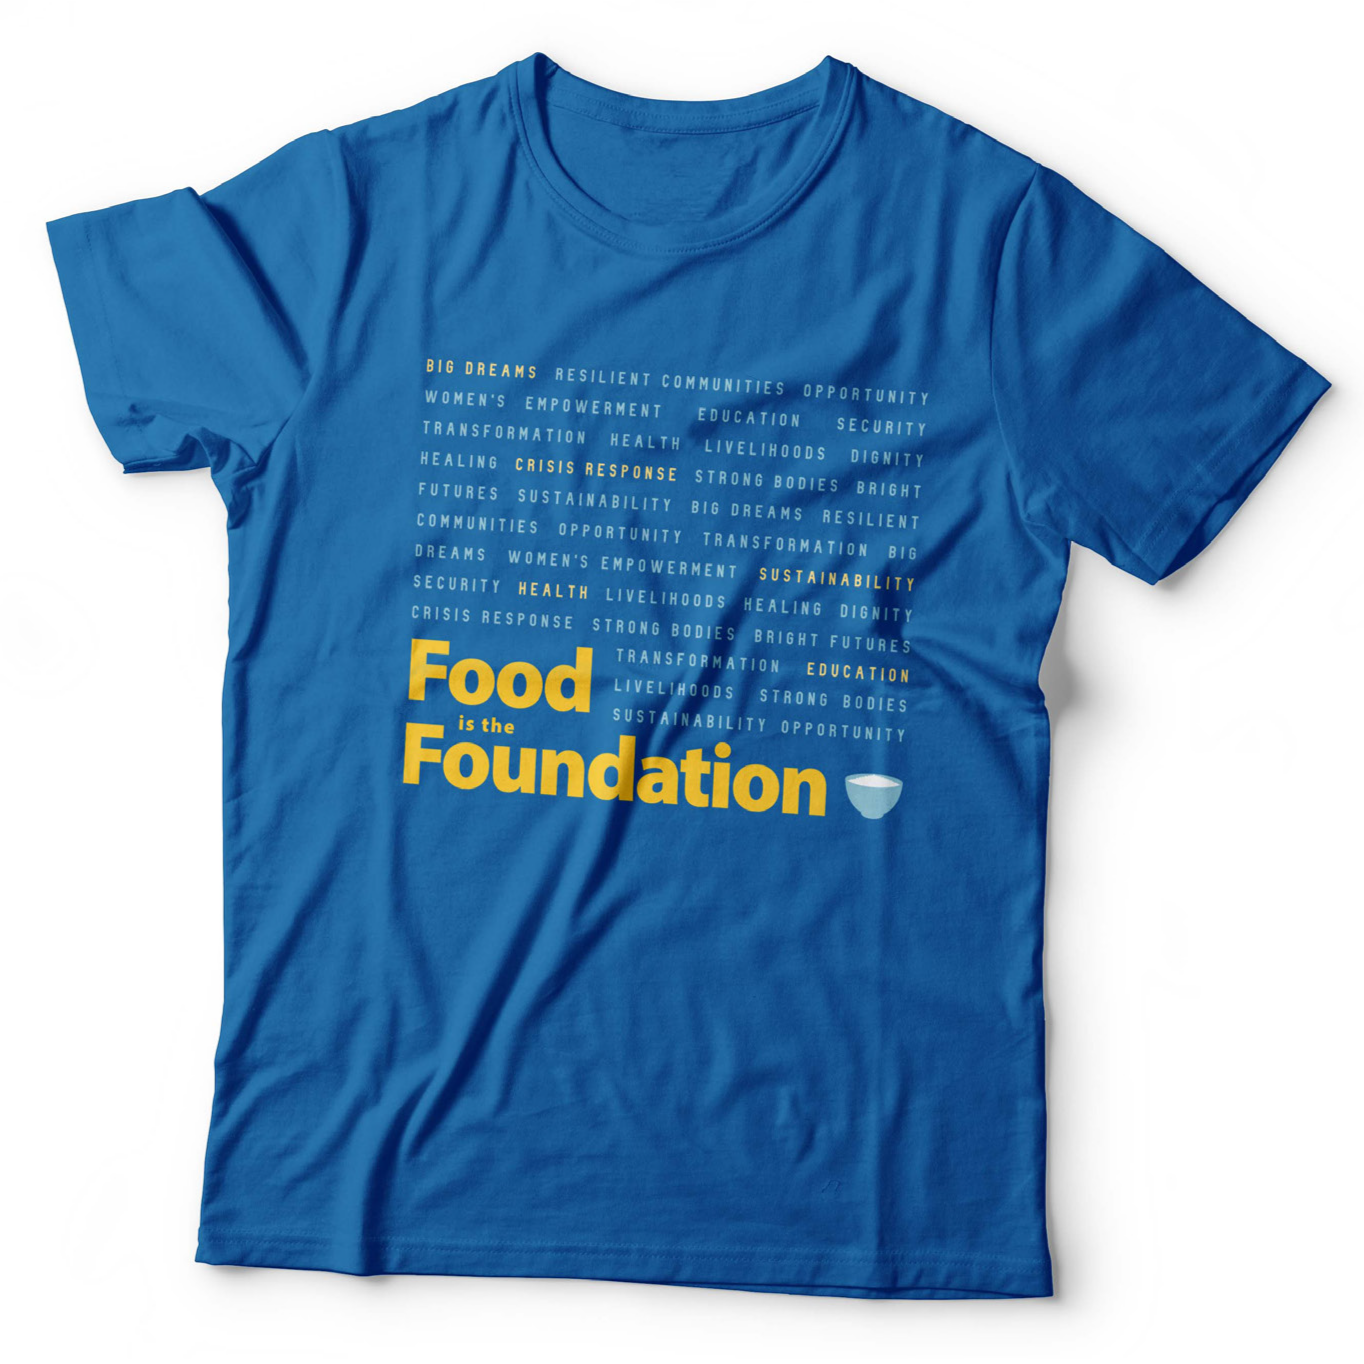 About That Che T-Shirt - Foundation for Economic Education